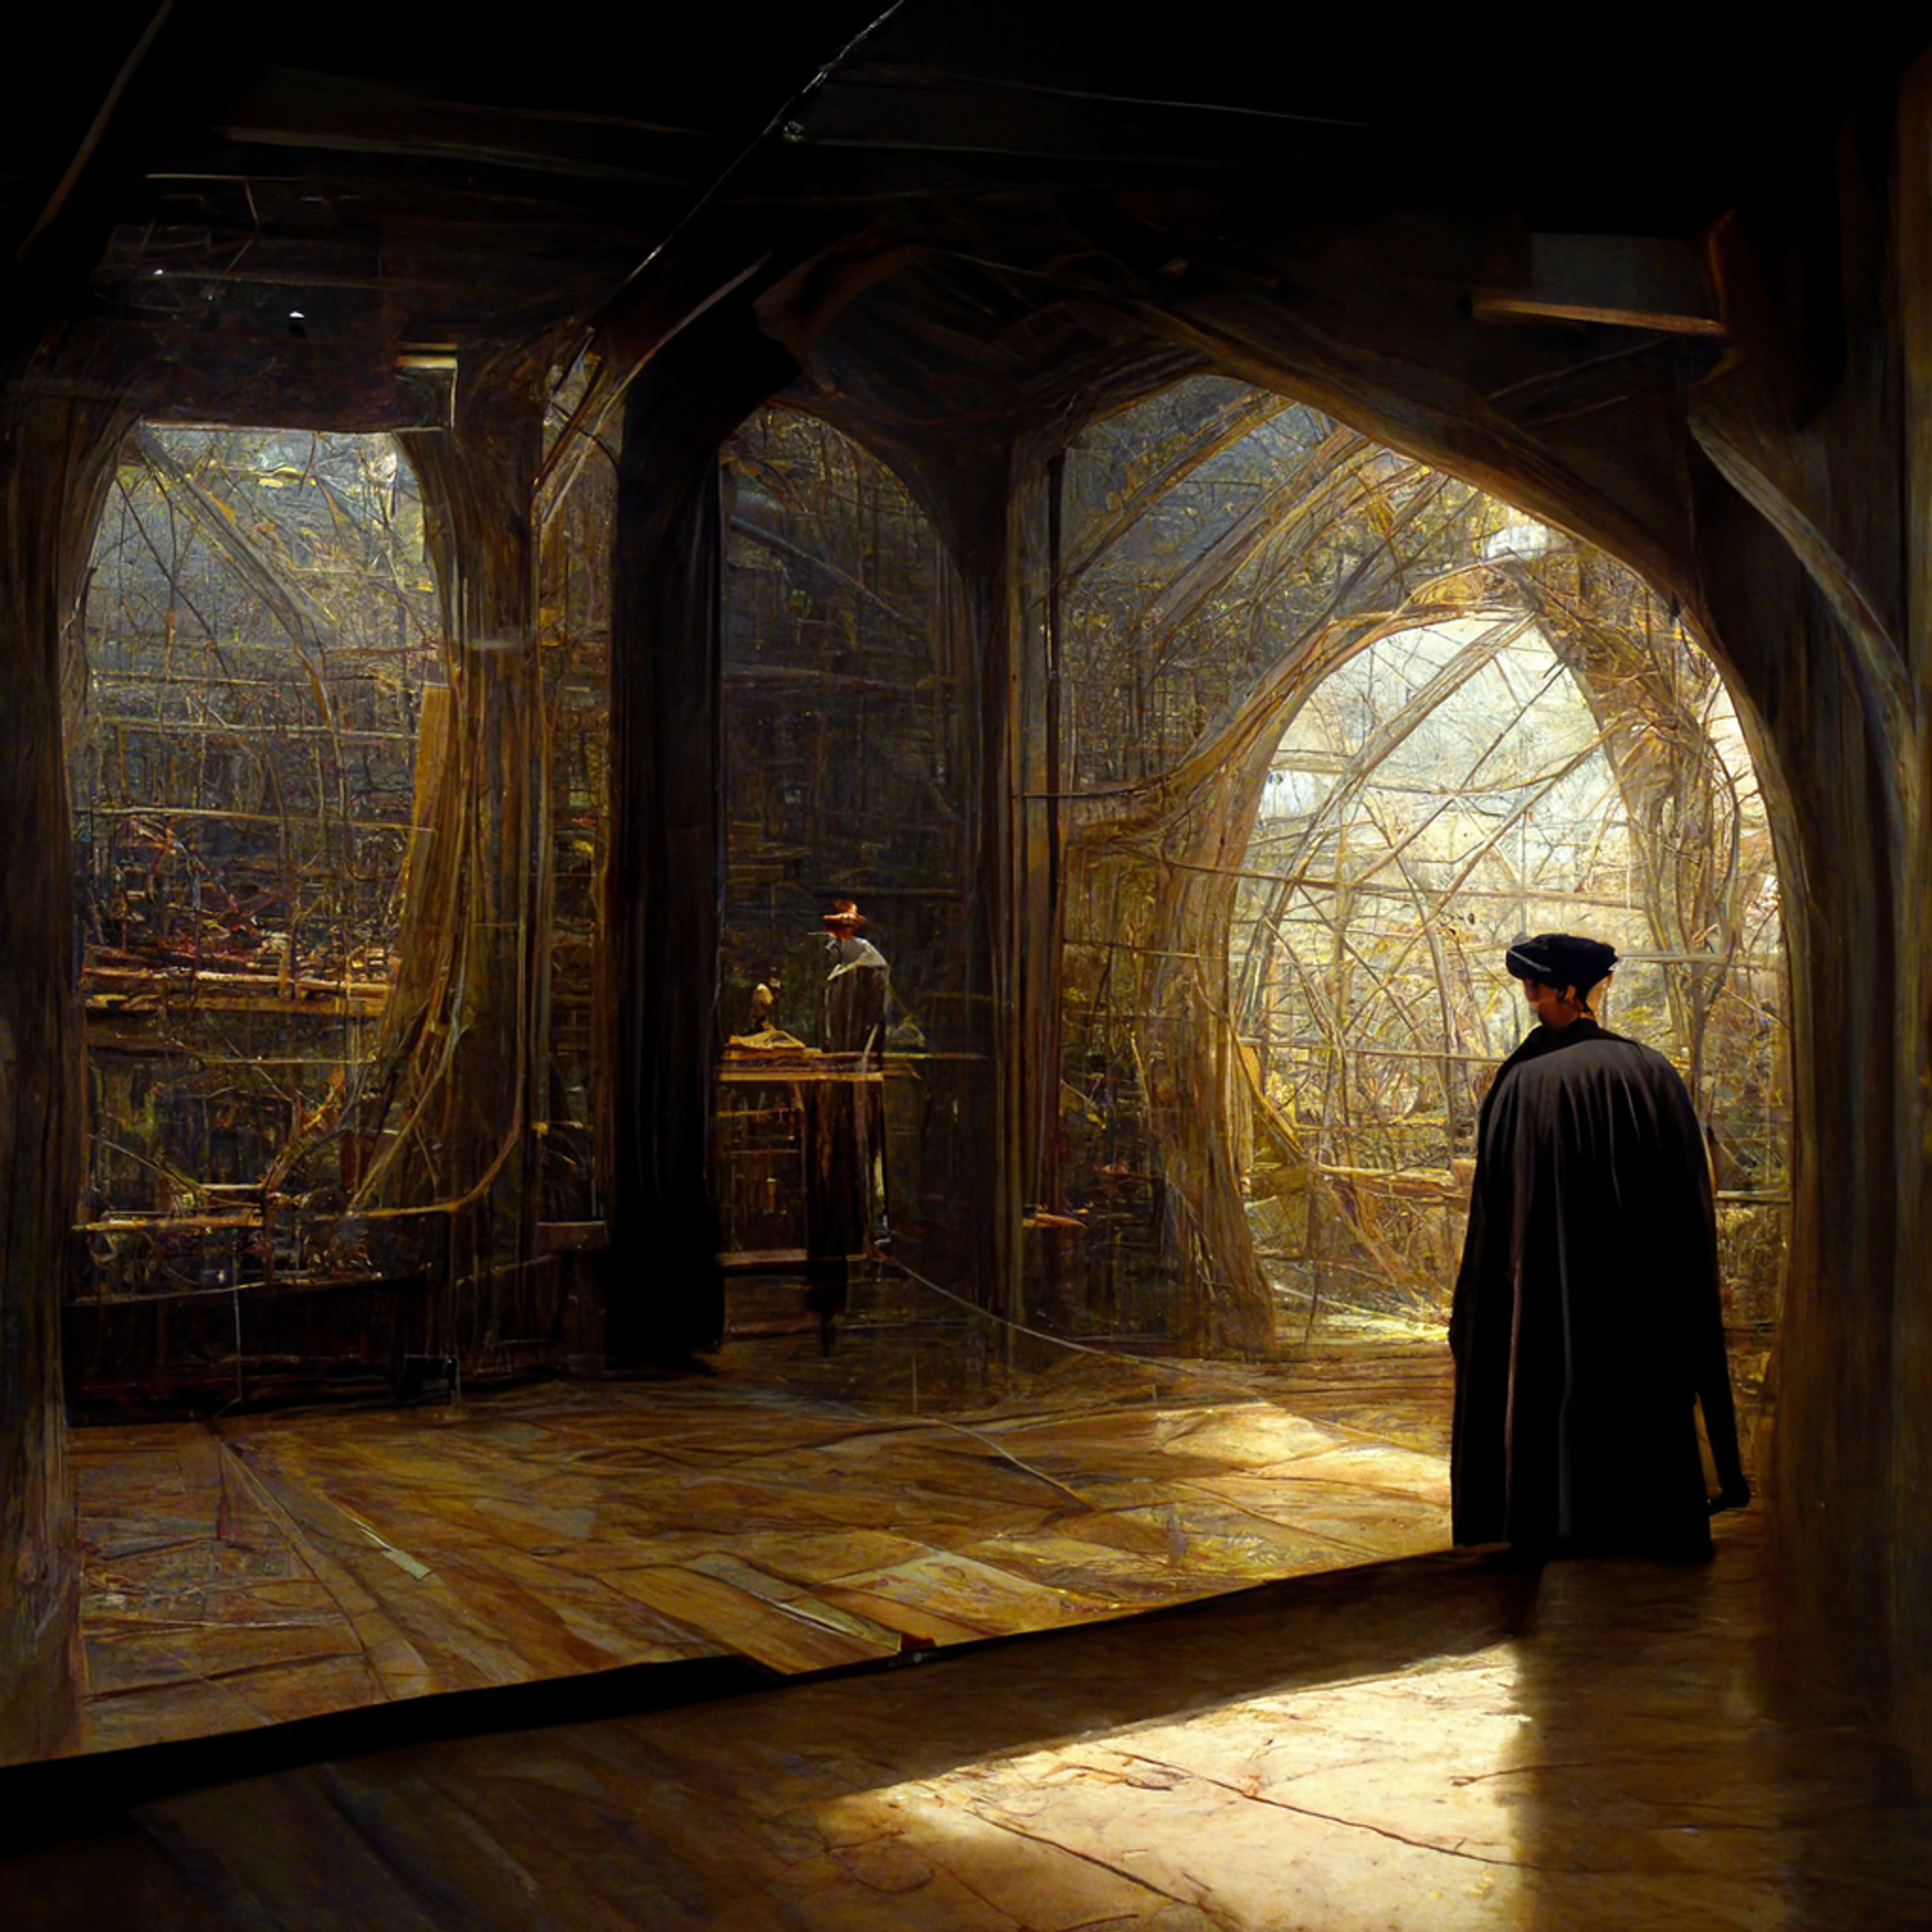 /imagine an ultrarealistic cinematic picture of hamlet on the holodeck